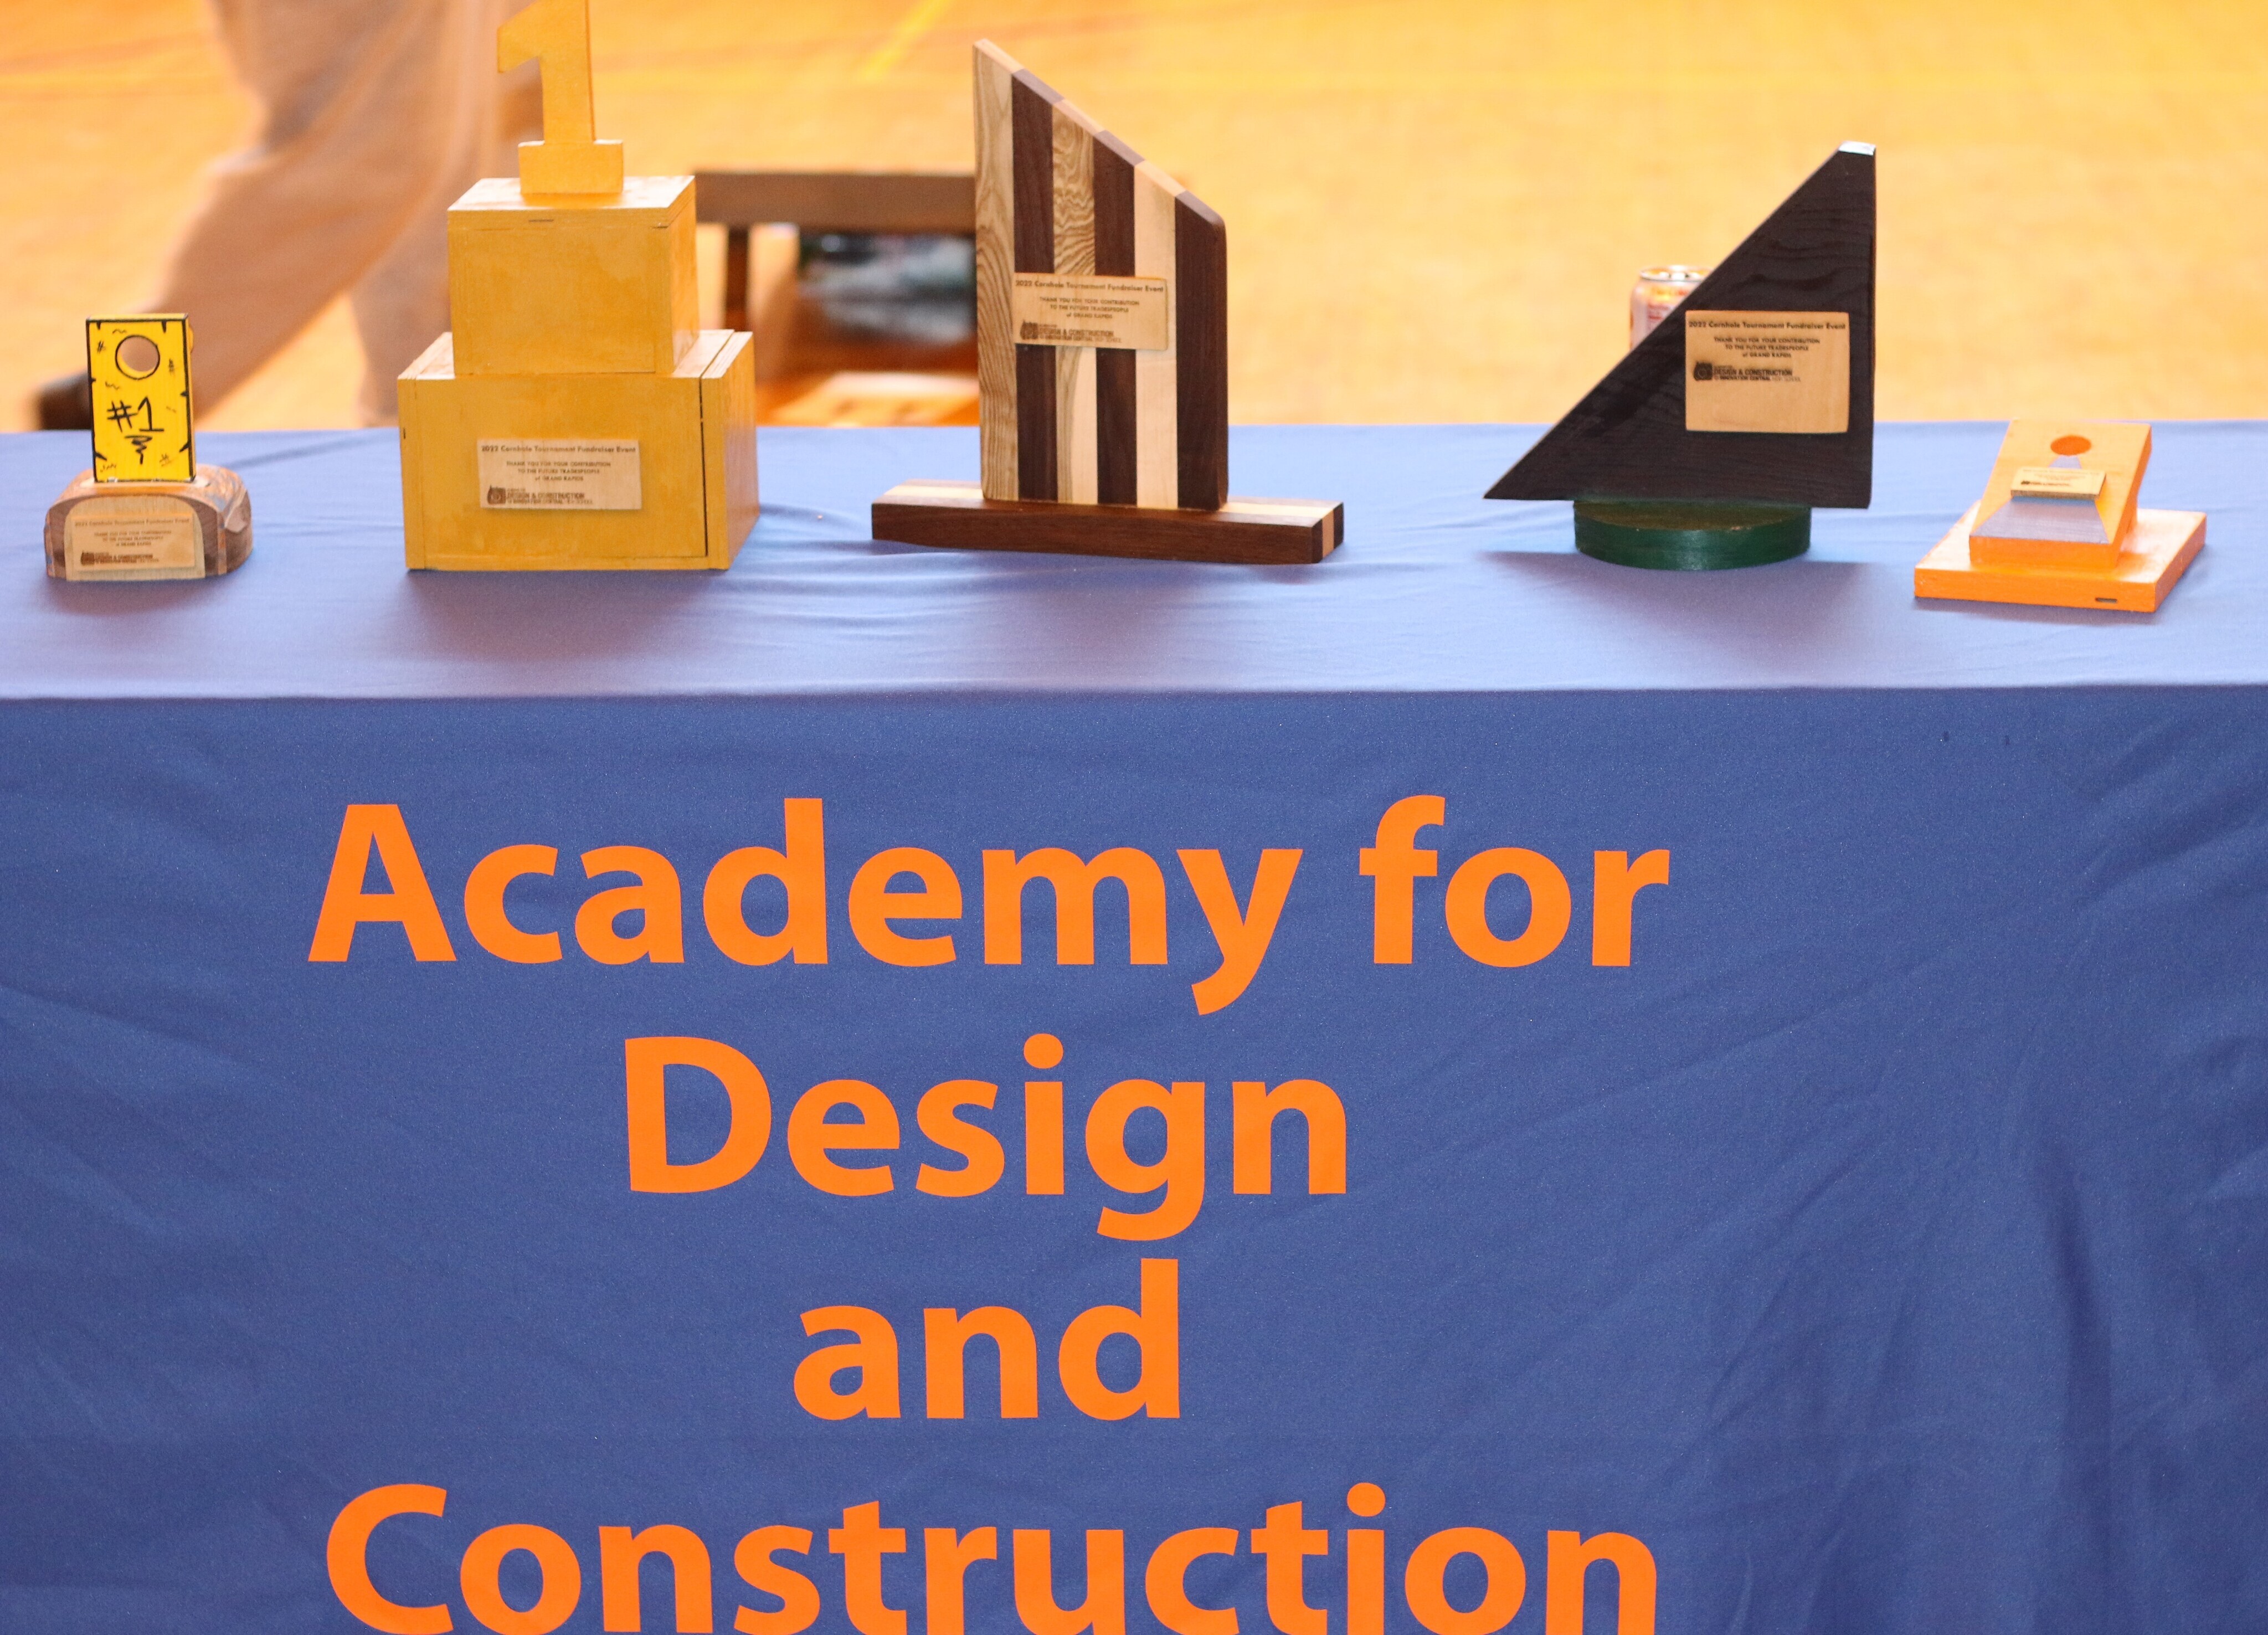 All of the trophies in the cornhole tournament were created by students in the Academy of Design and Construction